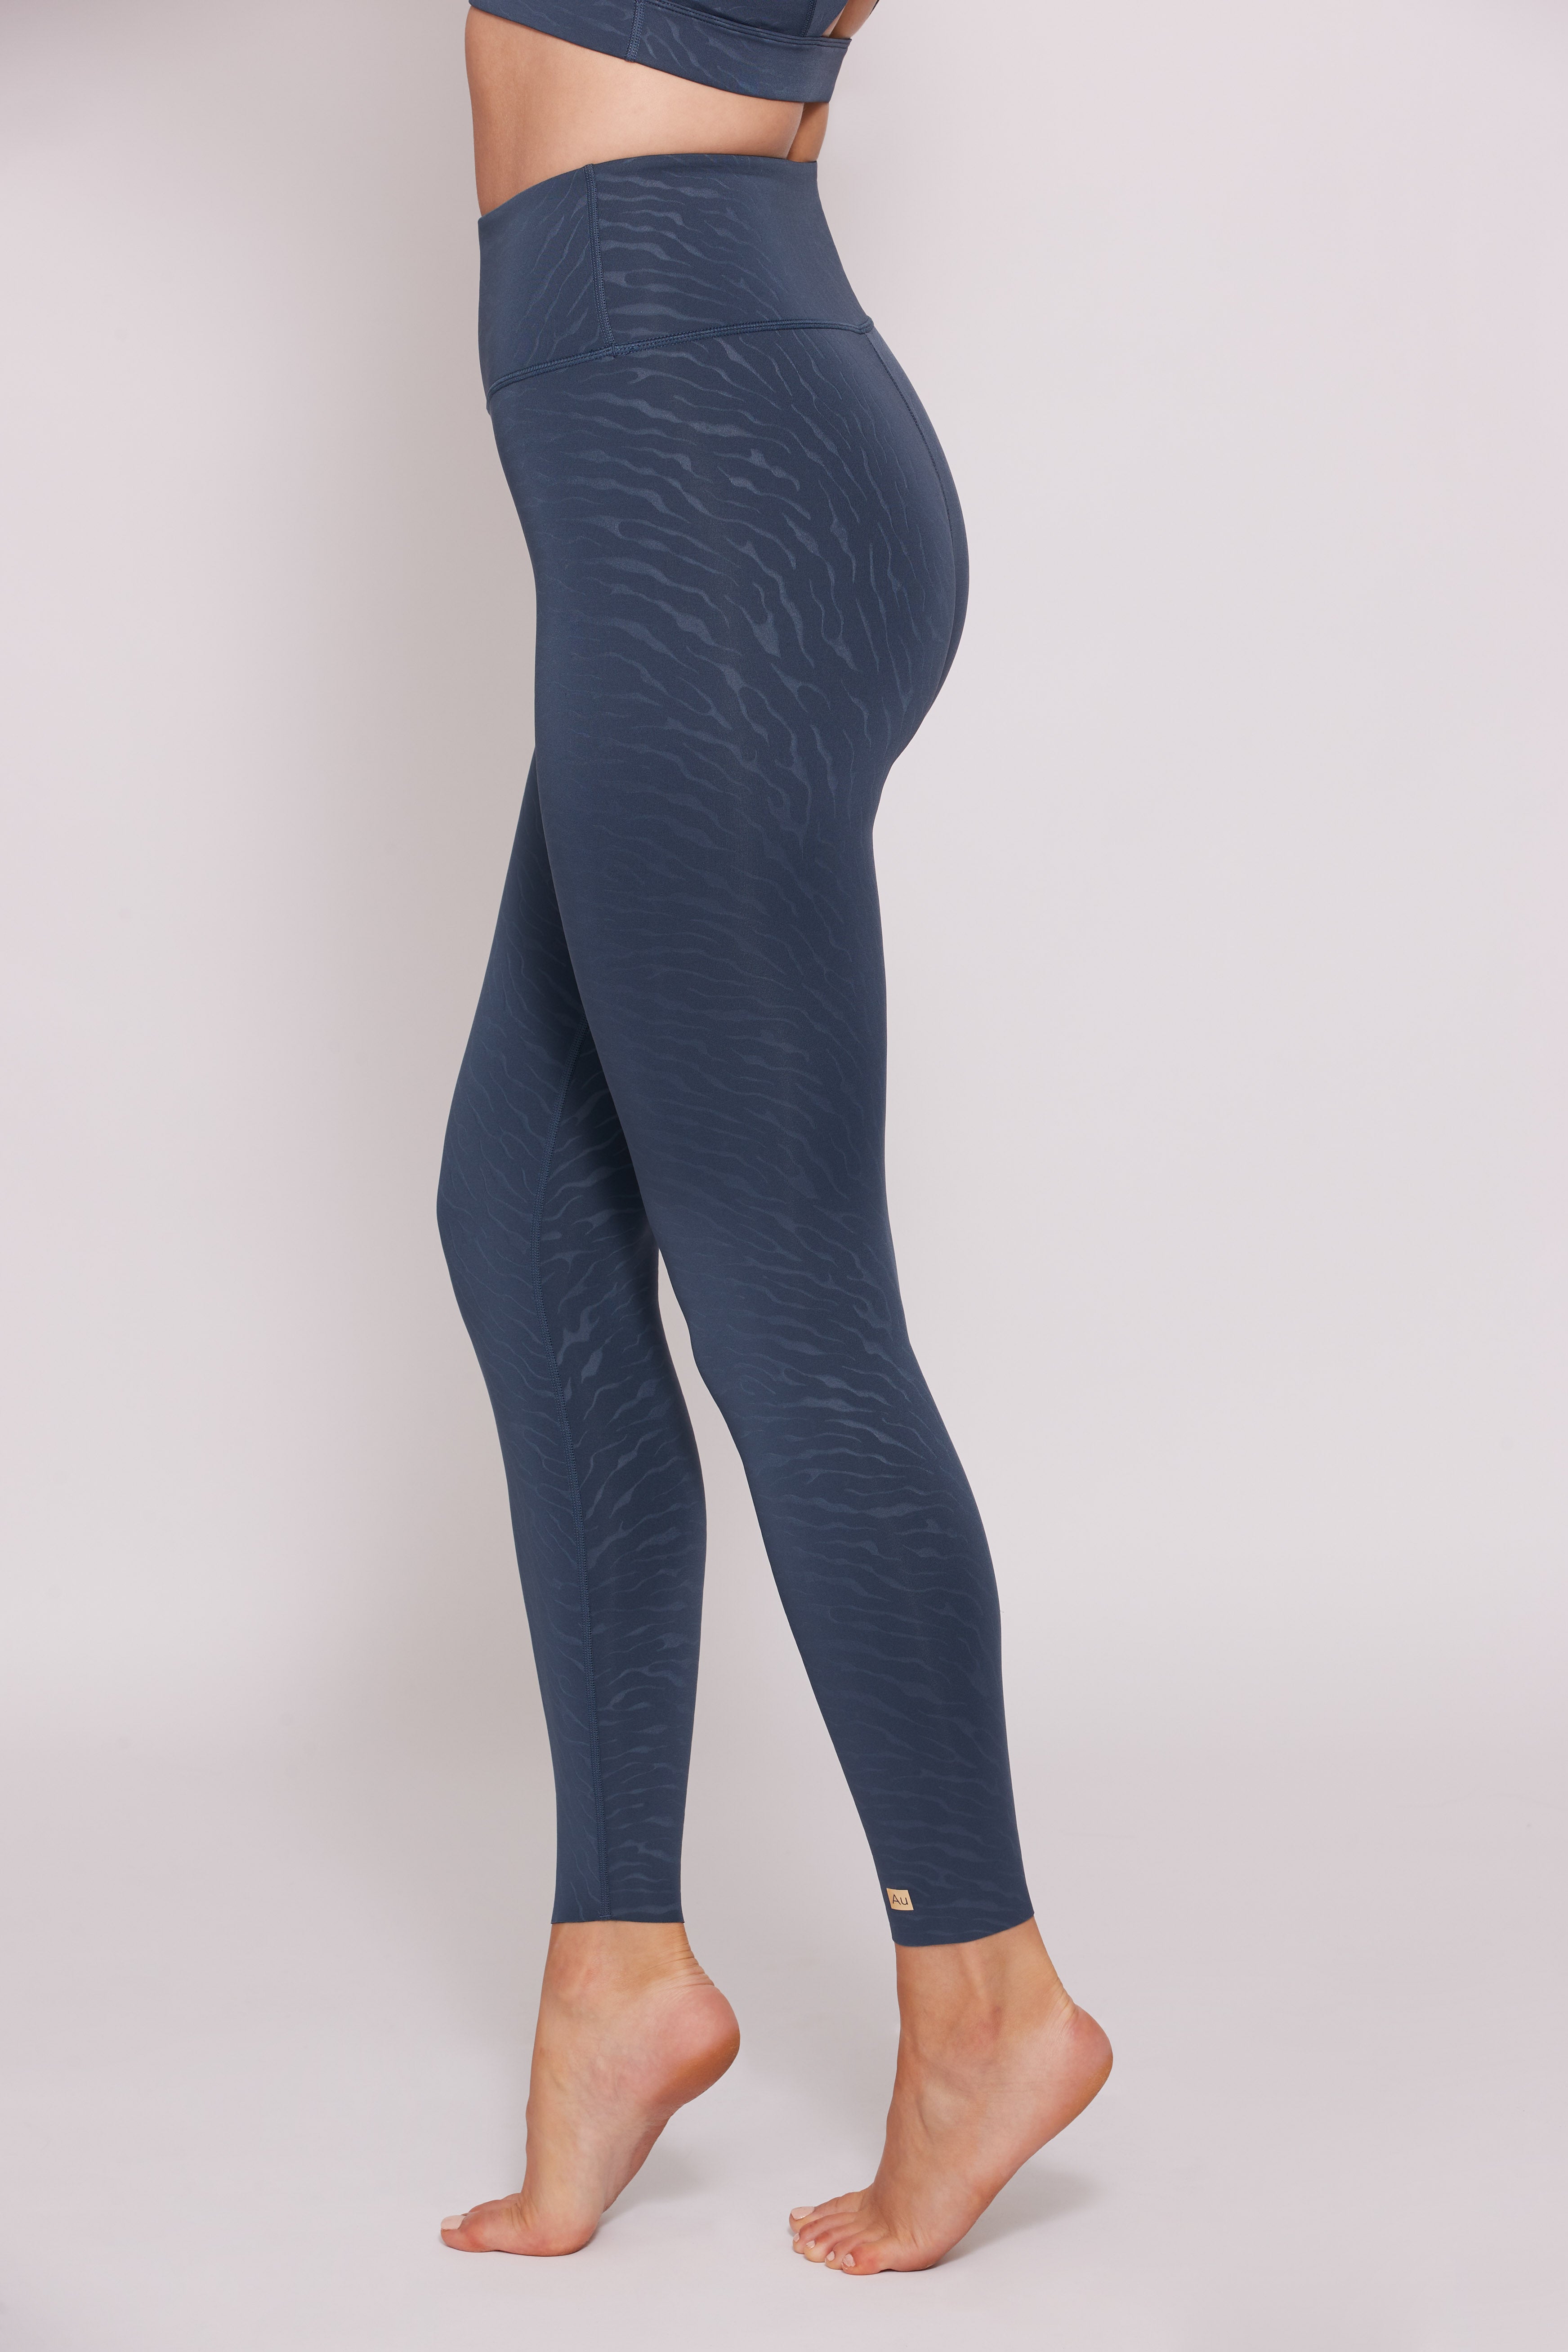 RECOVERY 3/4 LENGTH LEGGING ONYX – HINE COLLECTION